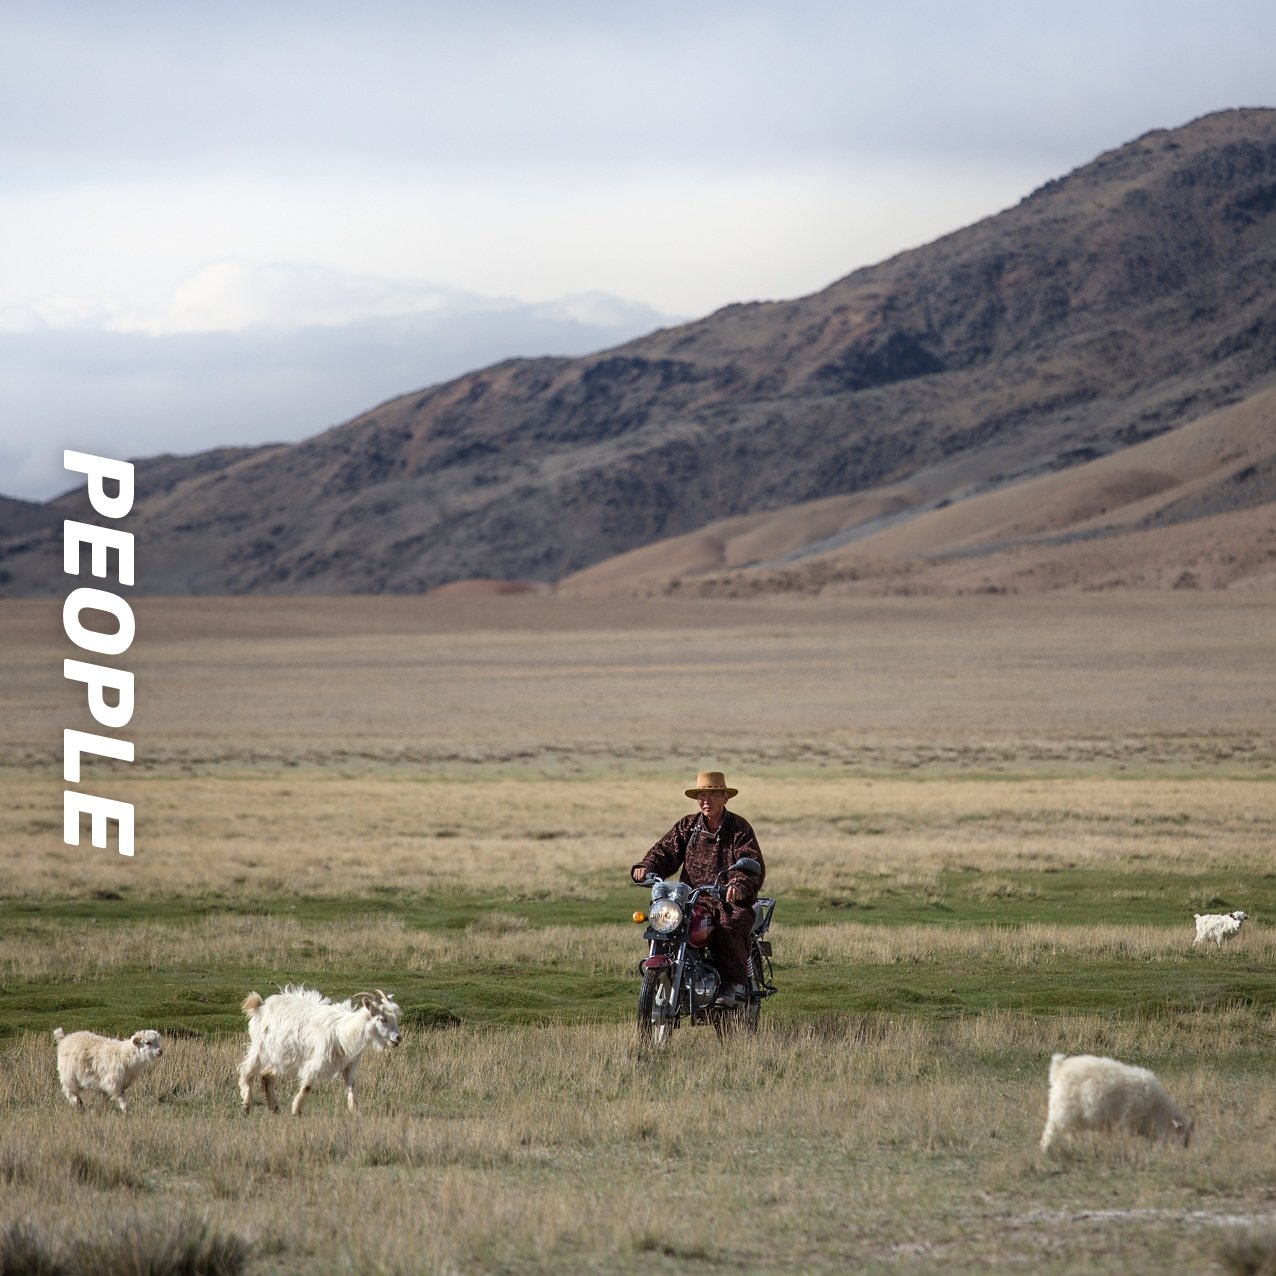 Sheep herder in Mongolia